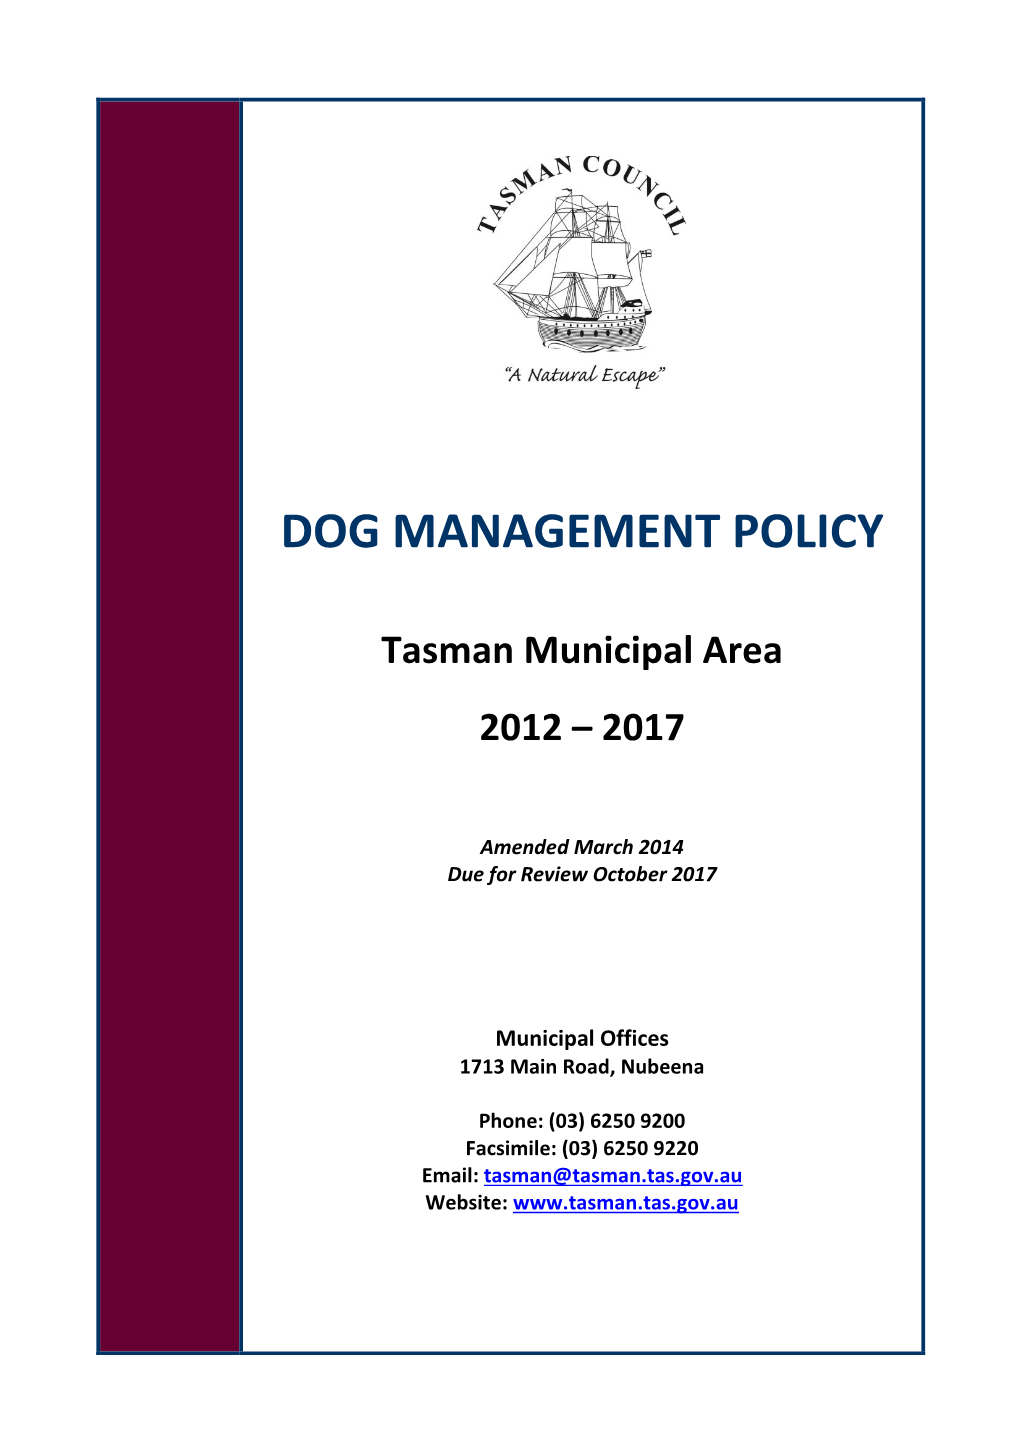 Dog Management Policy 2012-2017